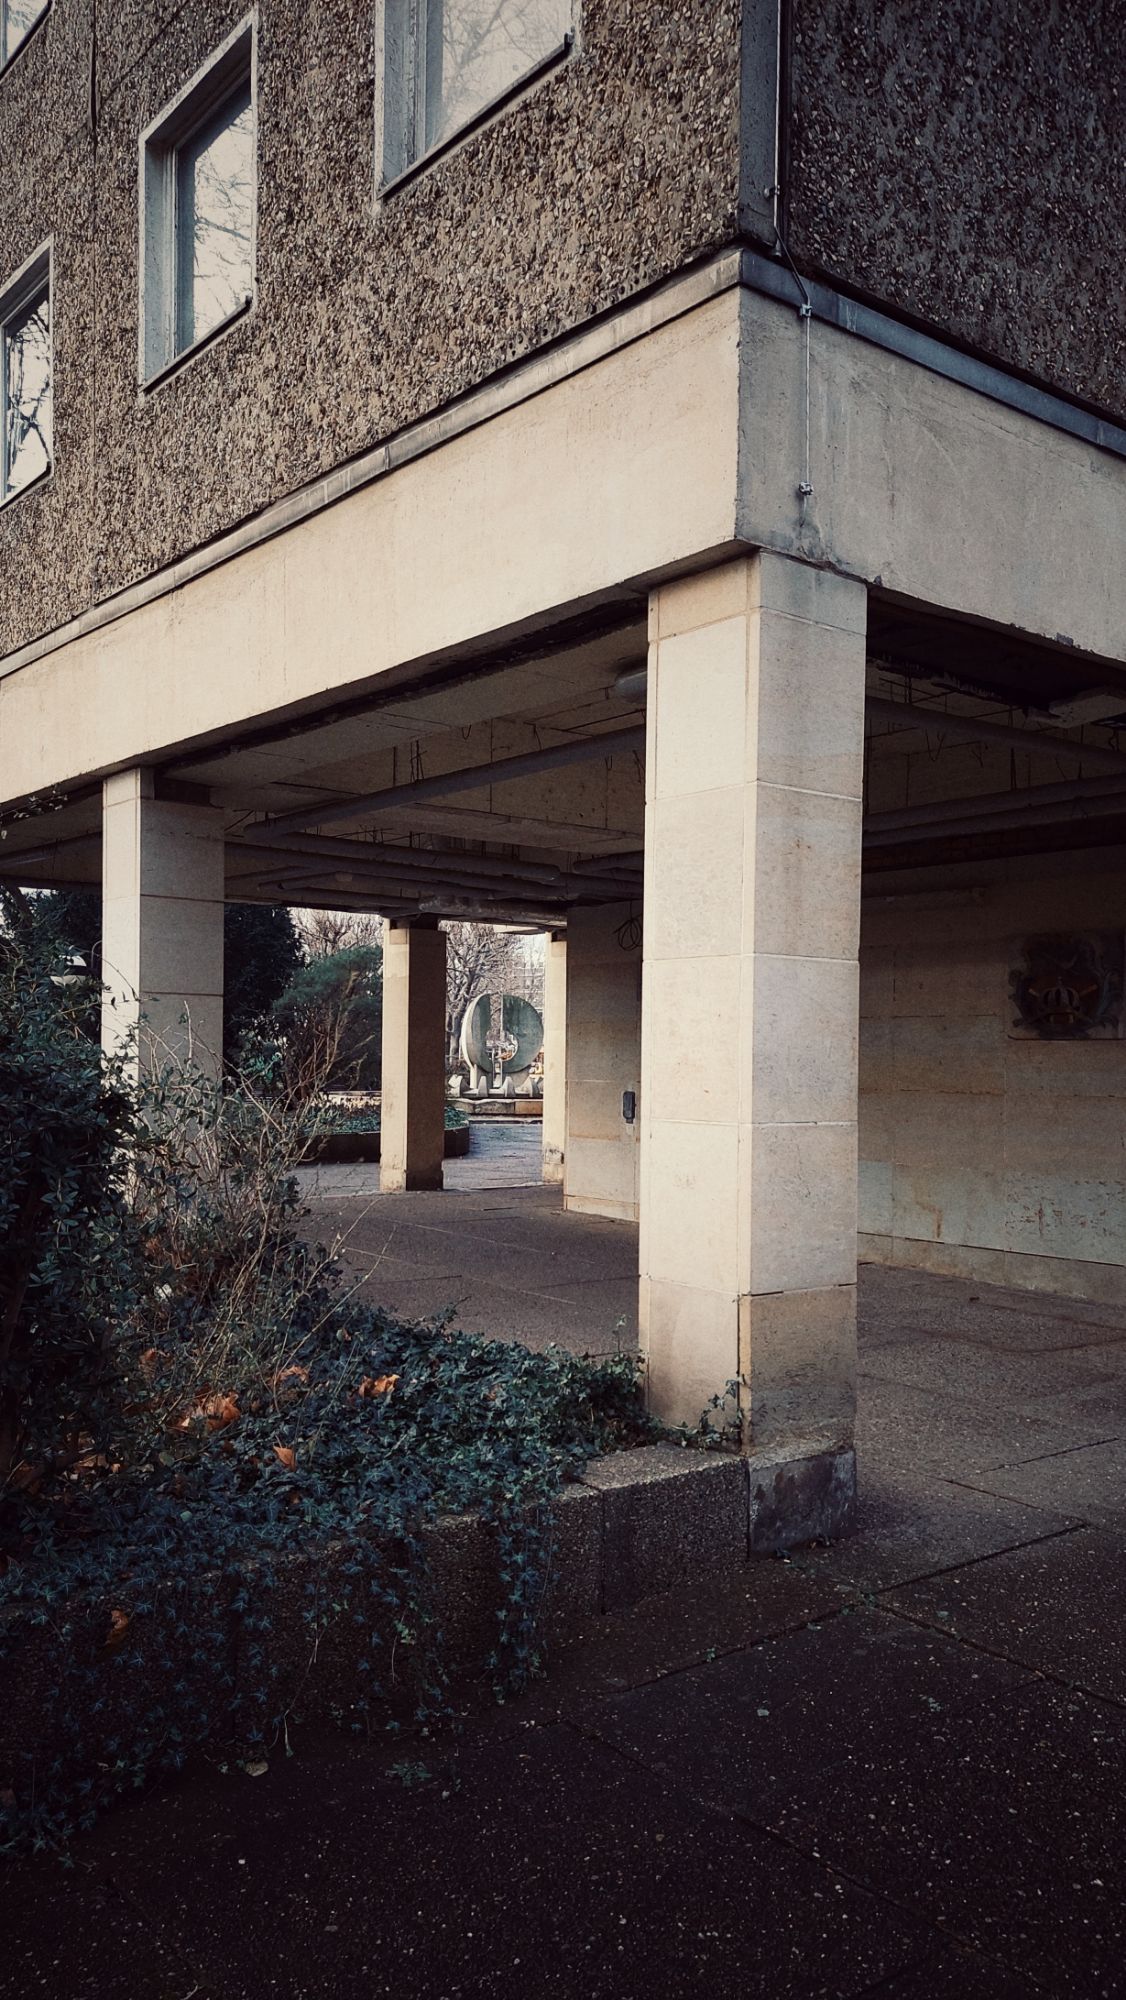 Concrete pillars as part of a building, with a partially open ceiling revealing pipes and other infrastructure. Left, a small piece of city green.